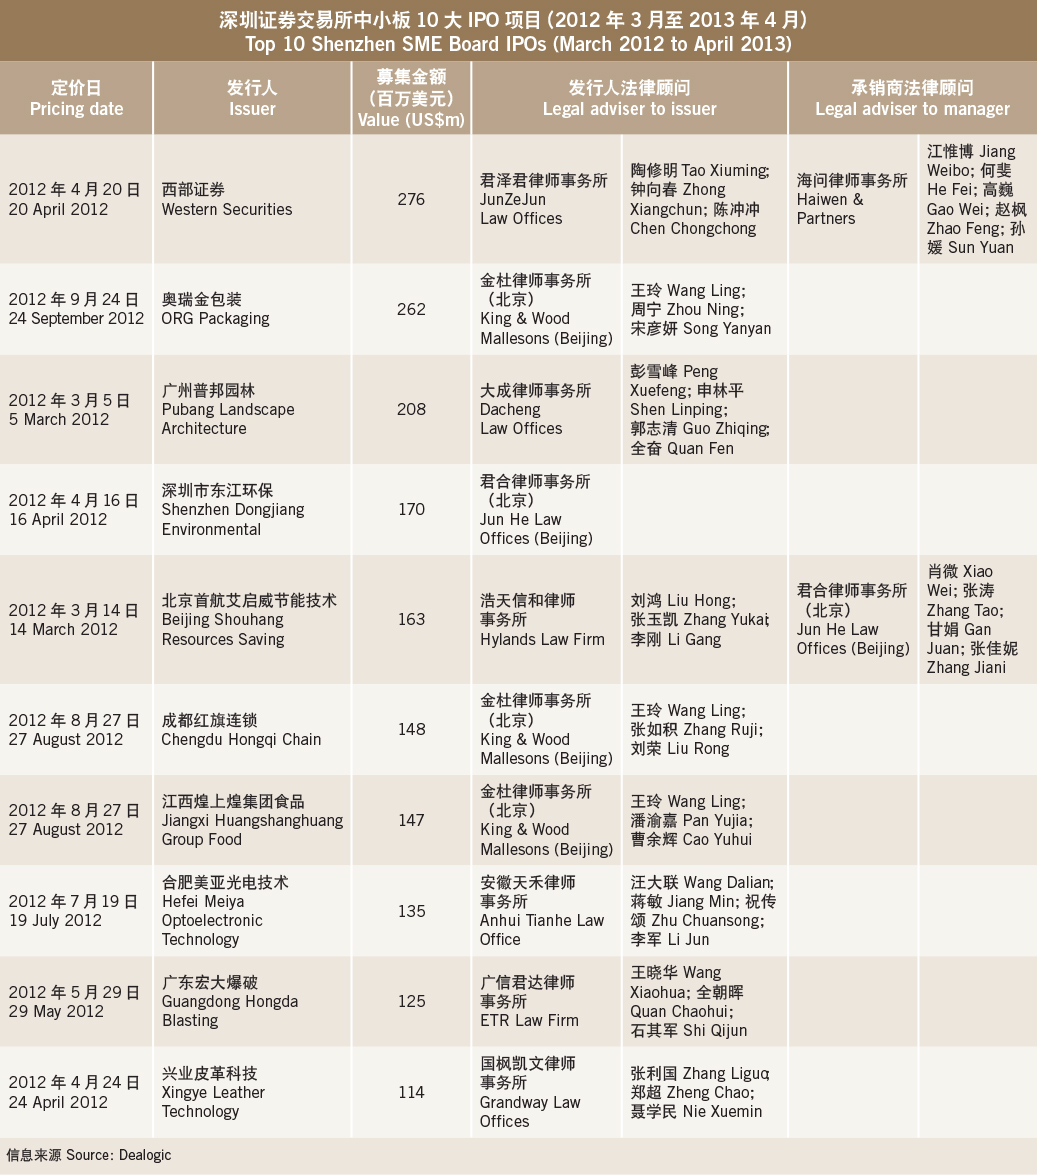 Capital navigations-Top 10 Shenzhen SME Board IPOs (March 2012 to April 2013)